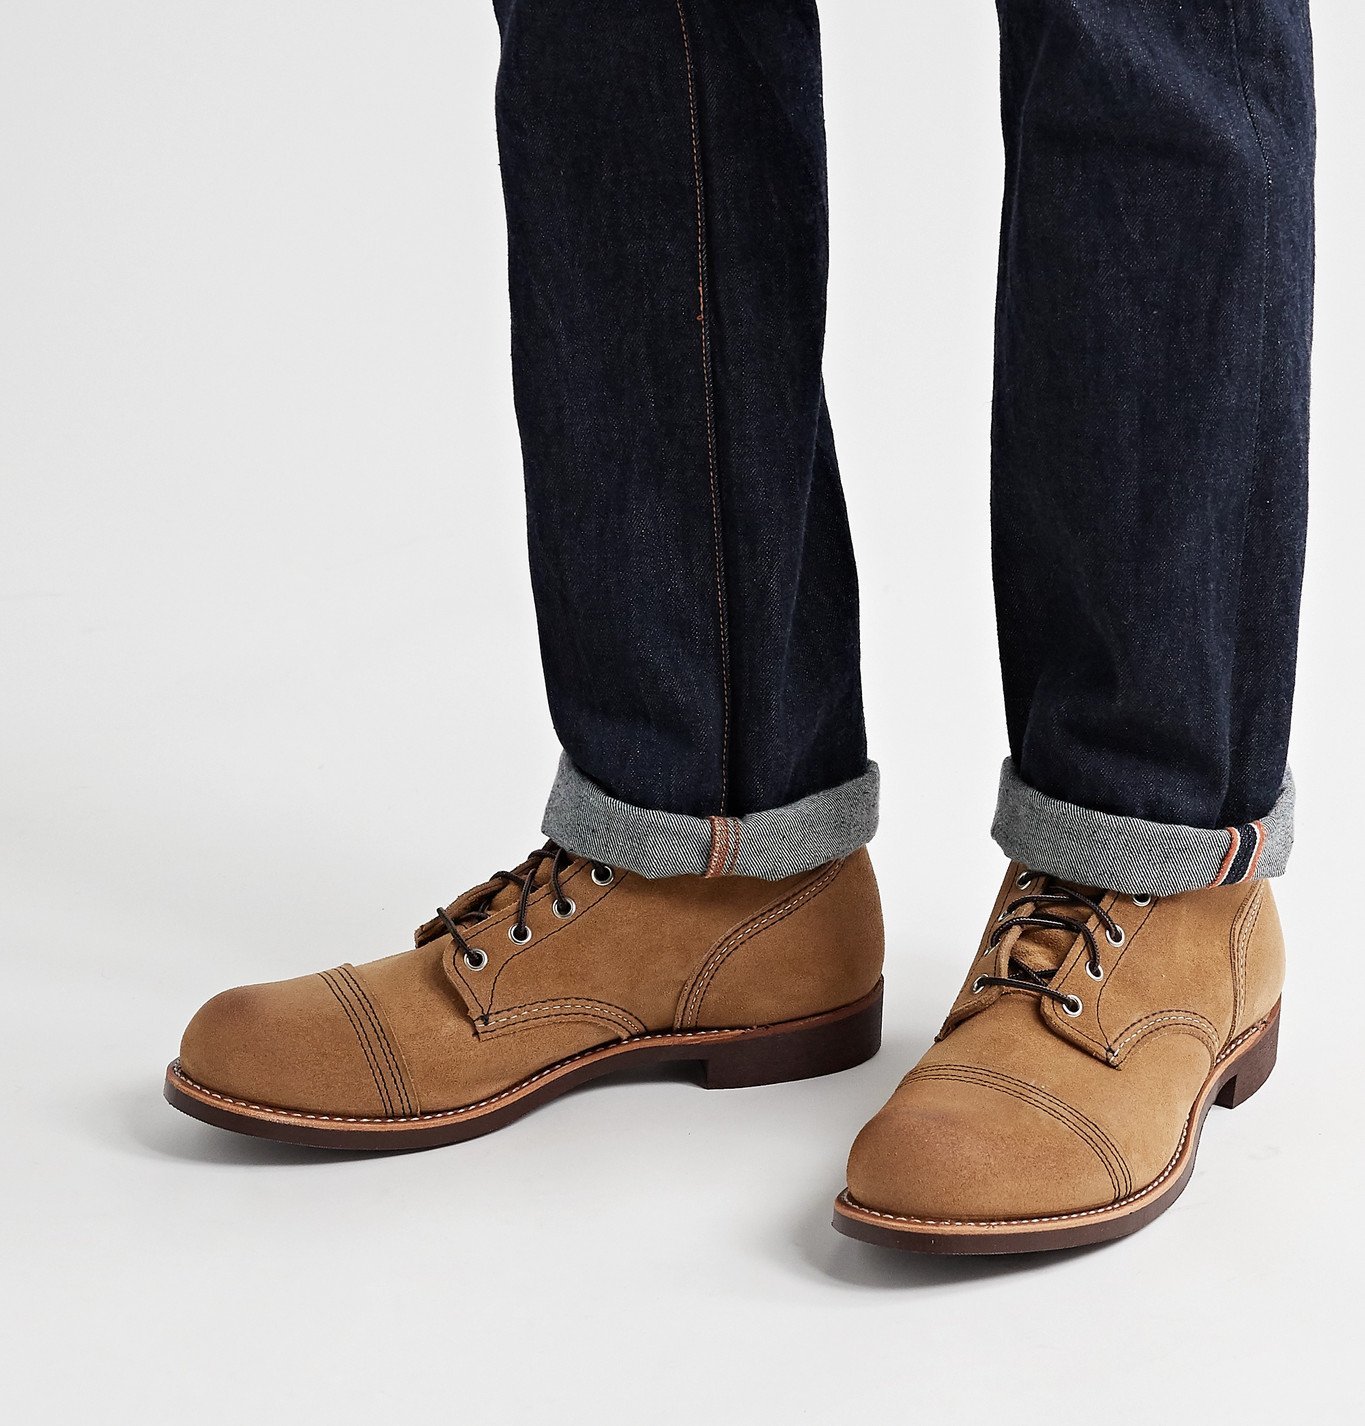 Red Wing Shoes - Iron Ranger Roughout Suede Boots - Brown Red Wing Shoes